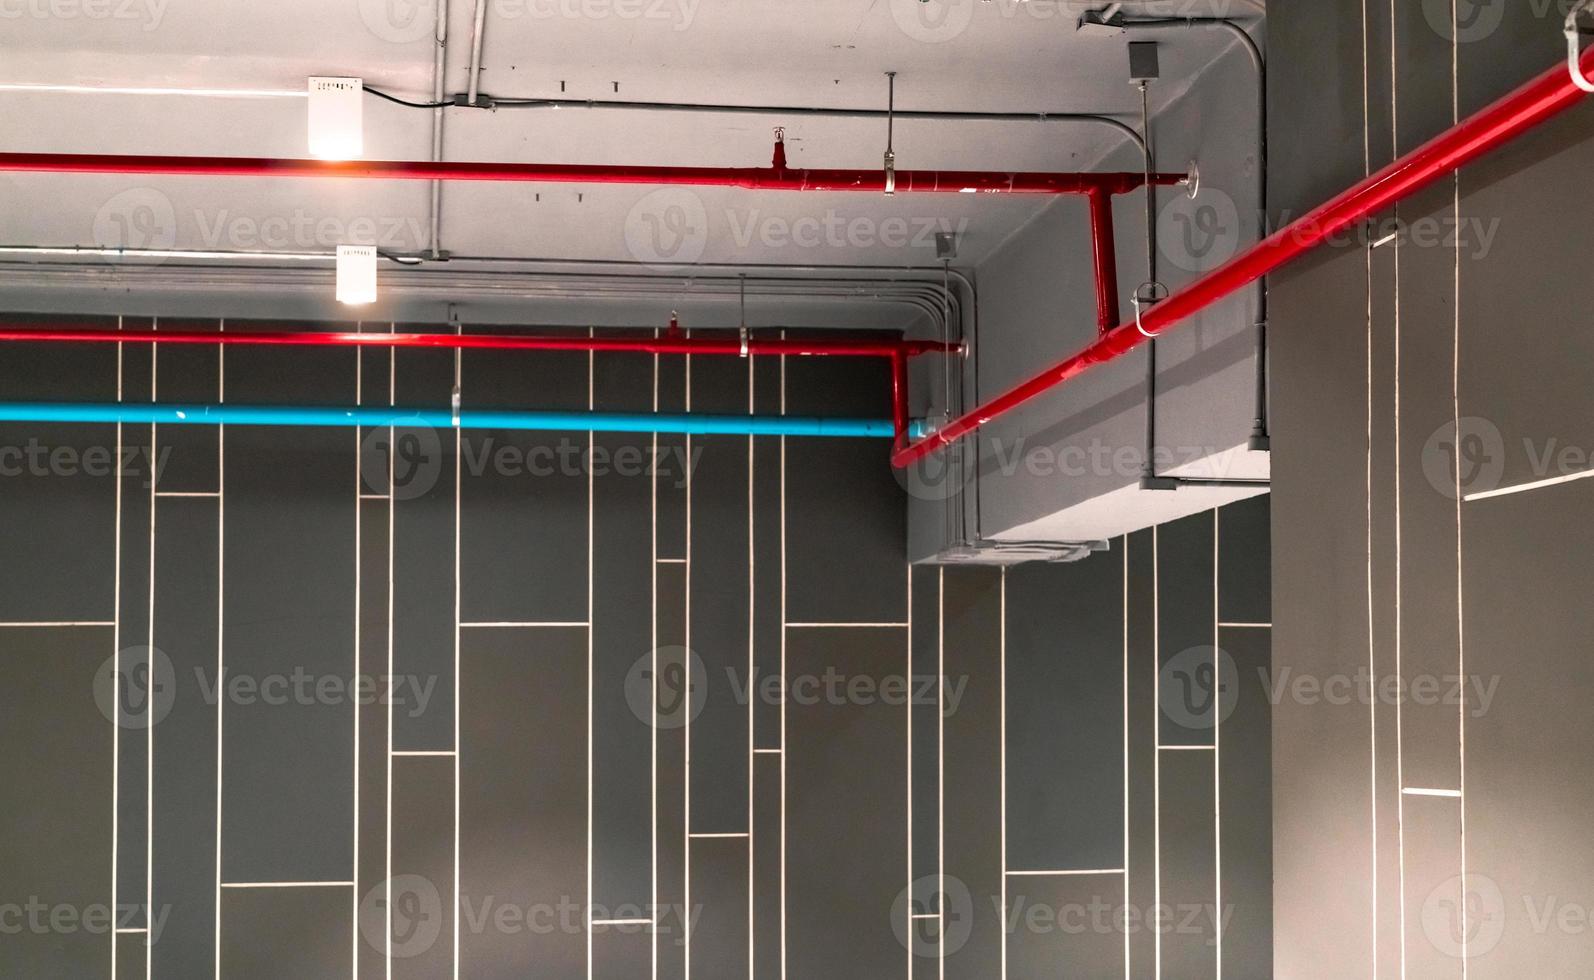 Automatic fire sprinkler safety system and red water supply pipe. Fire Suppression. Fire protection and detector. Fire sprinkler system with red pipe hanging from ceiling inside building. Wiring tube. photo